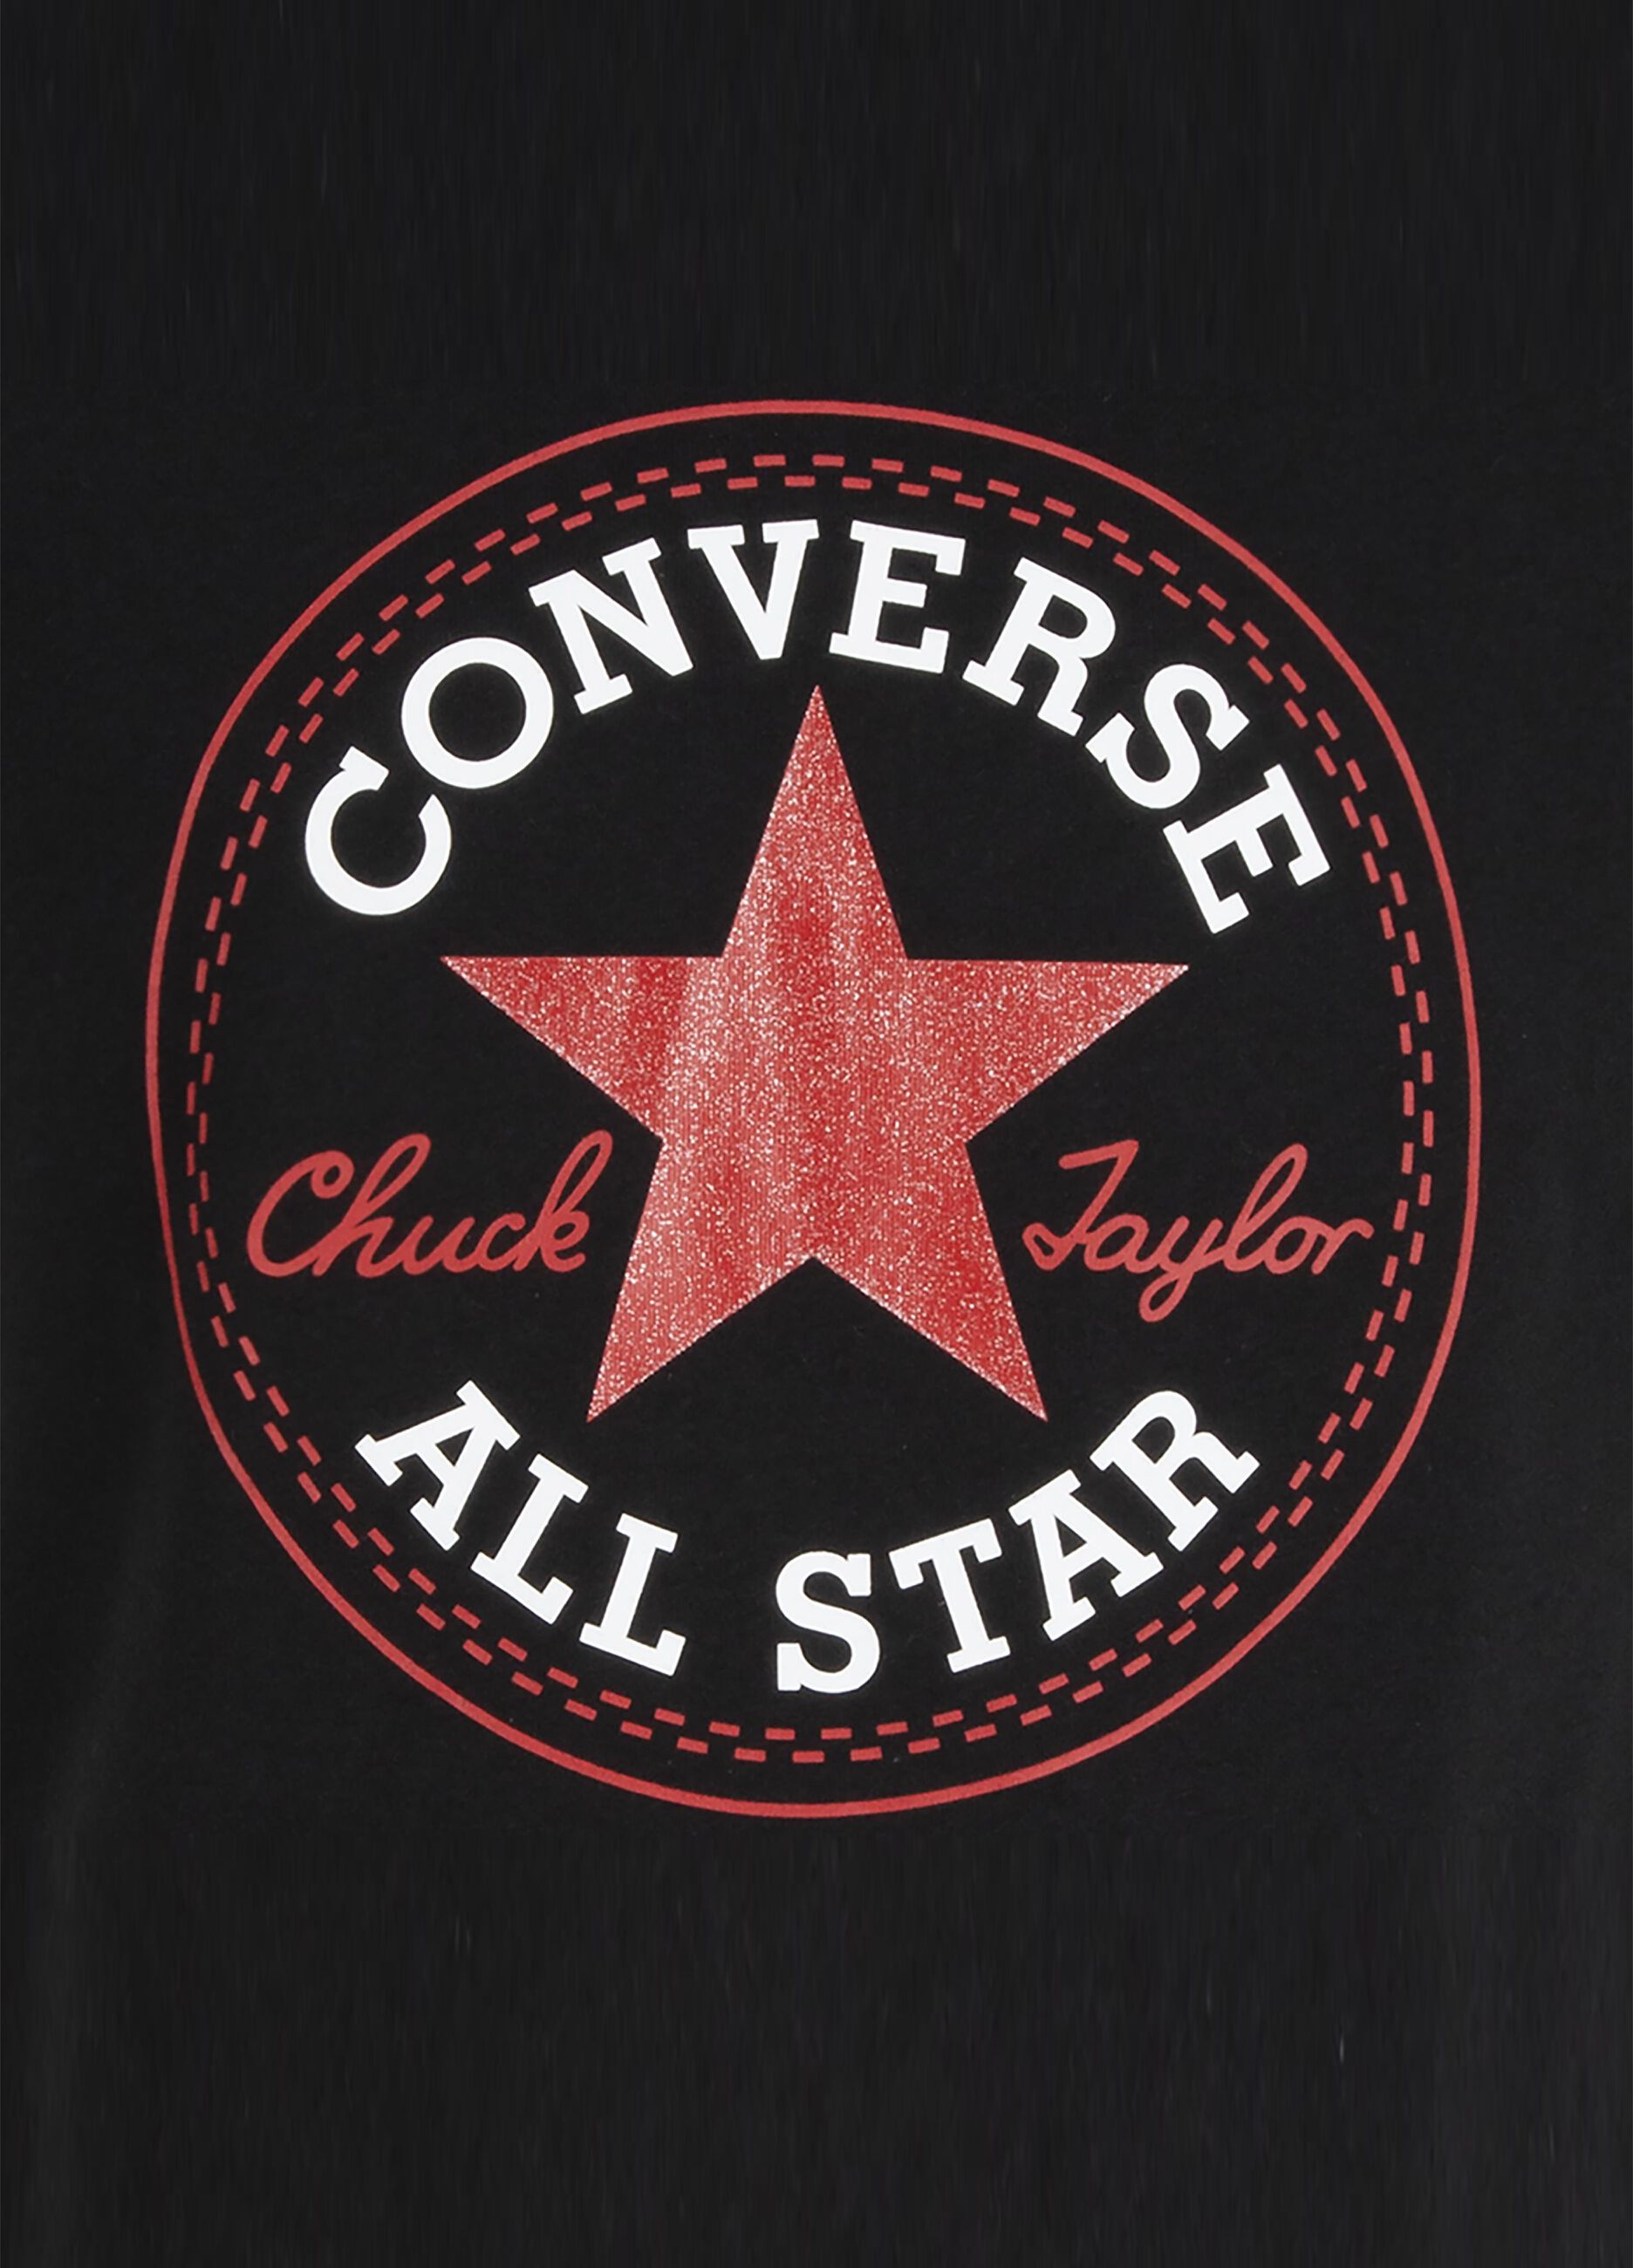 Slim-fit T-shirt with Chuck Patch logo glitter print